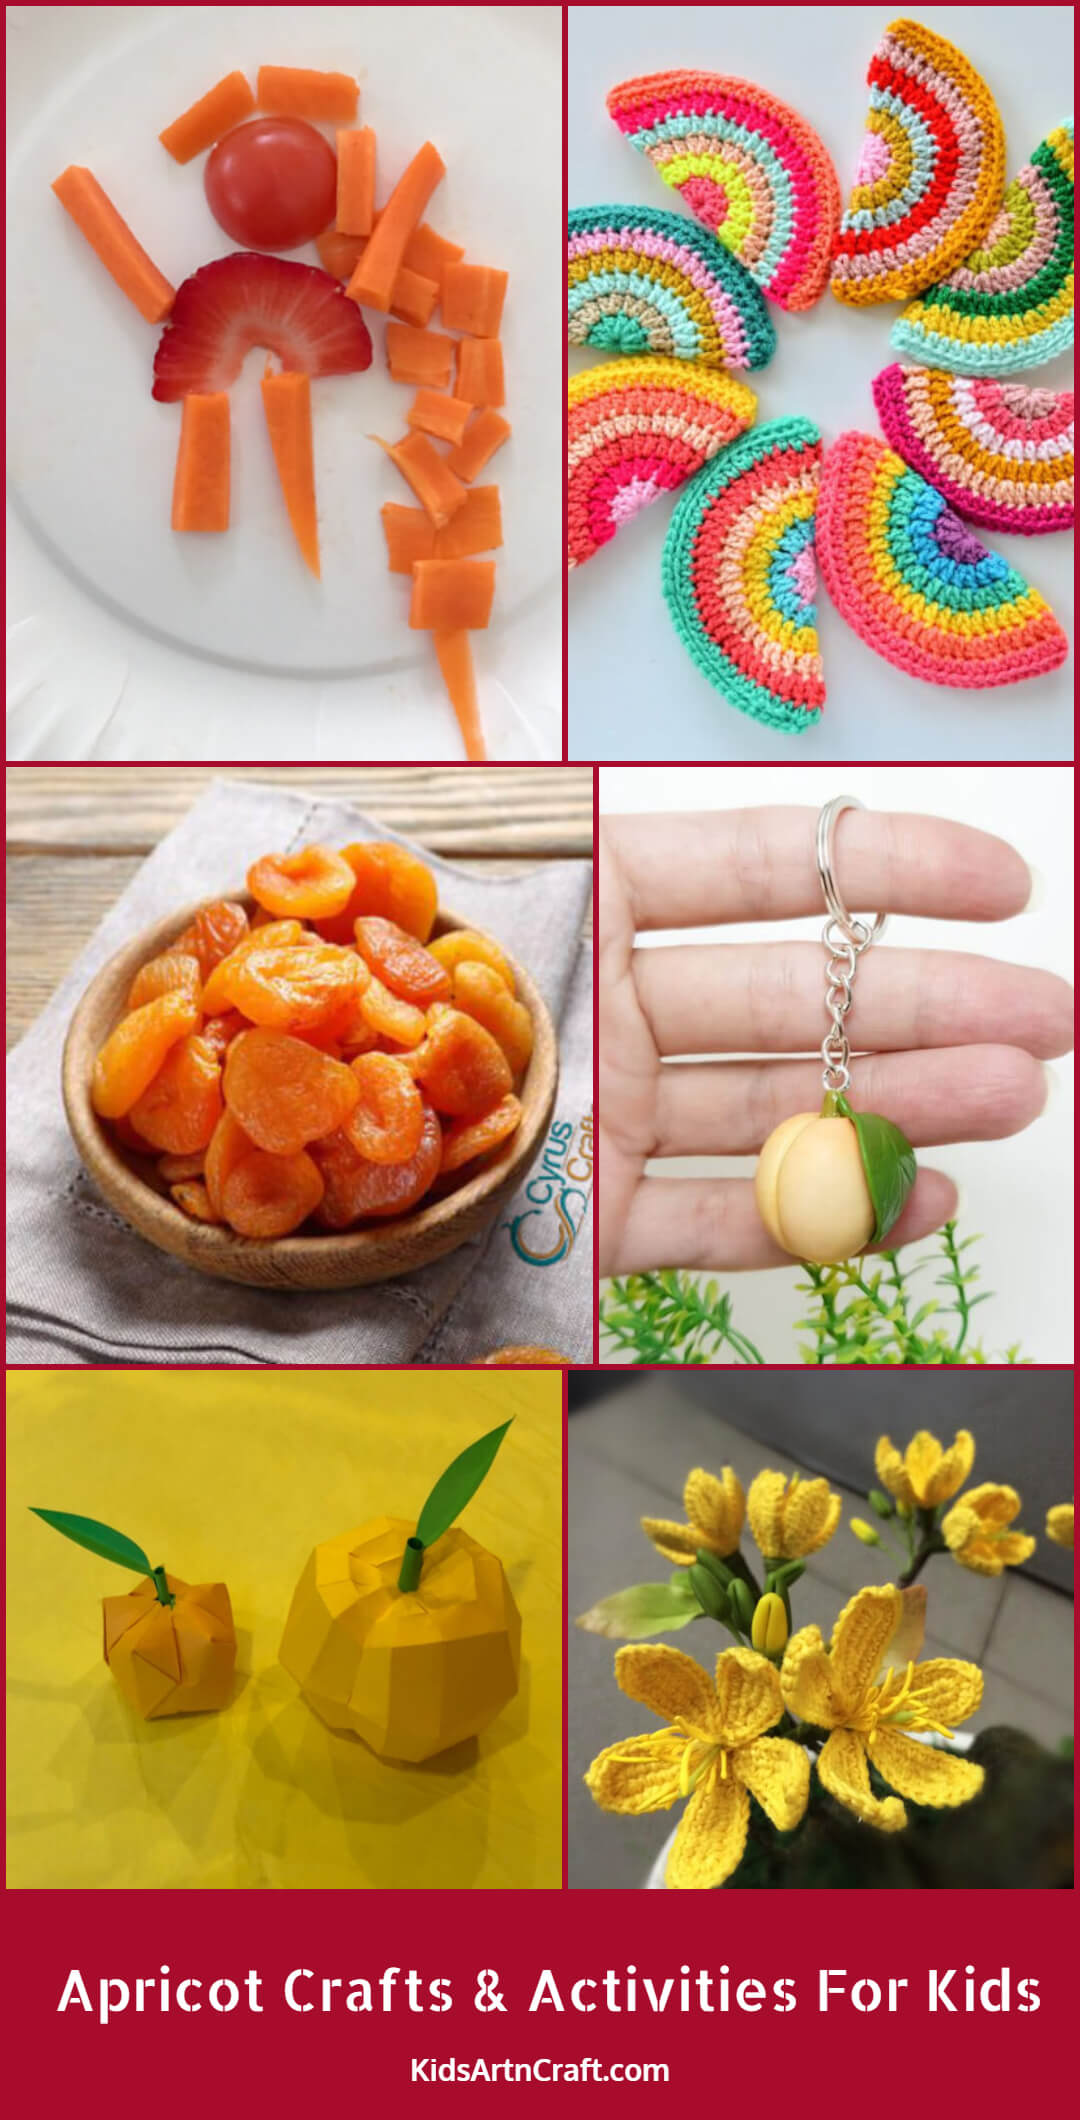 Apricot Crafts & Activities For Kids